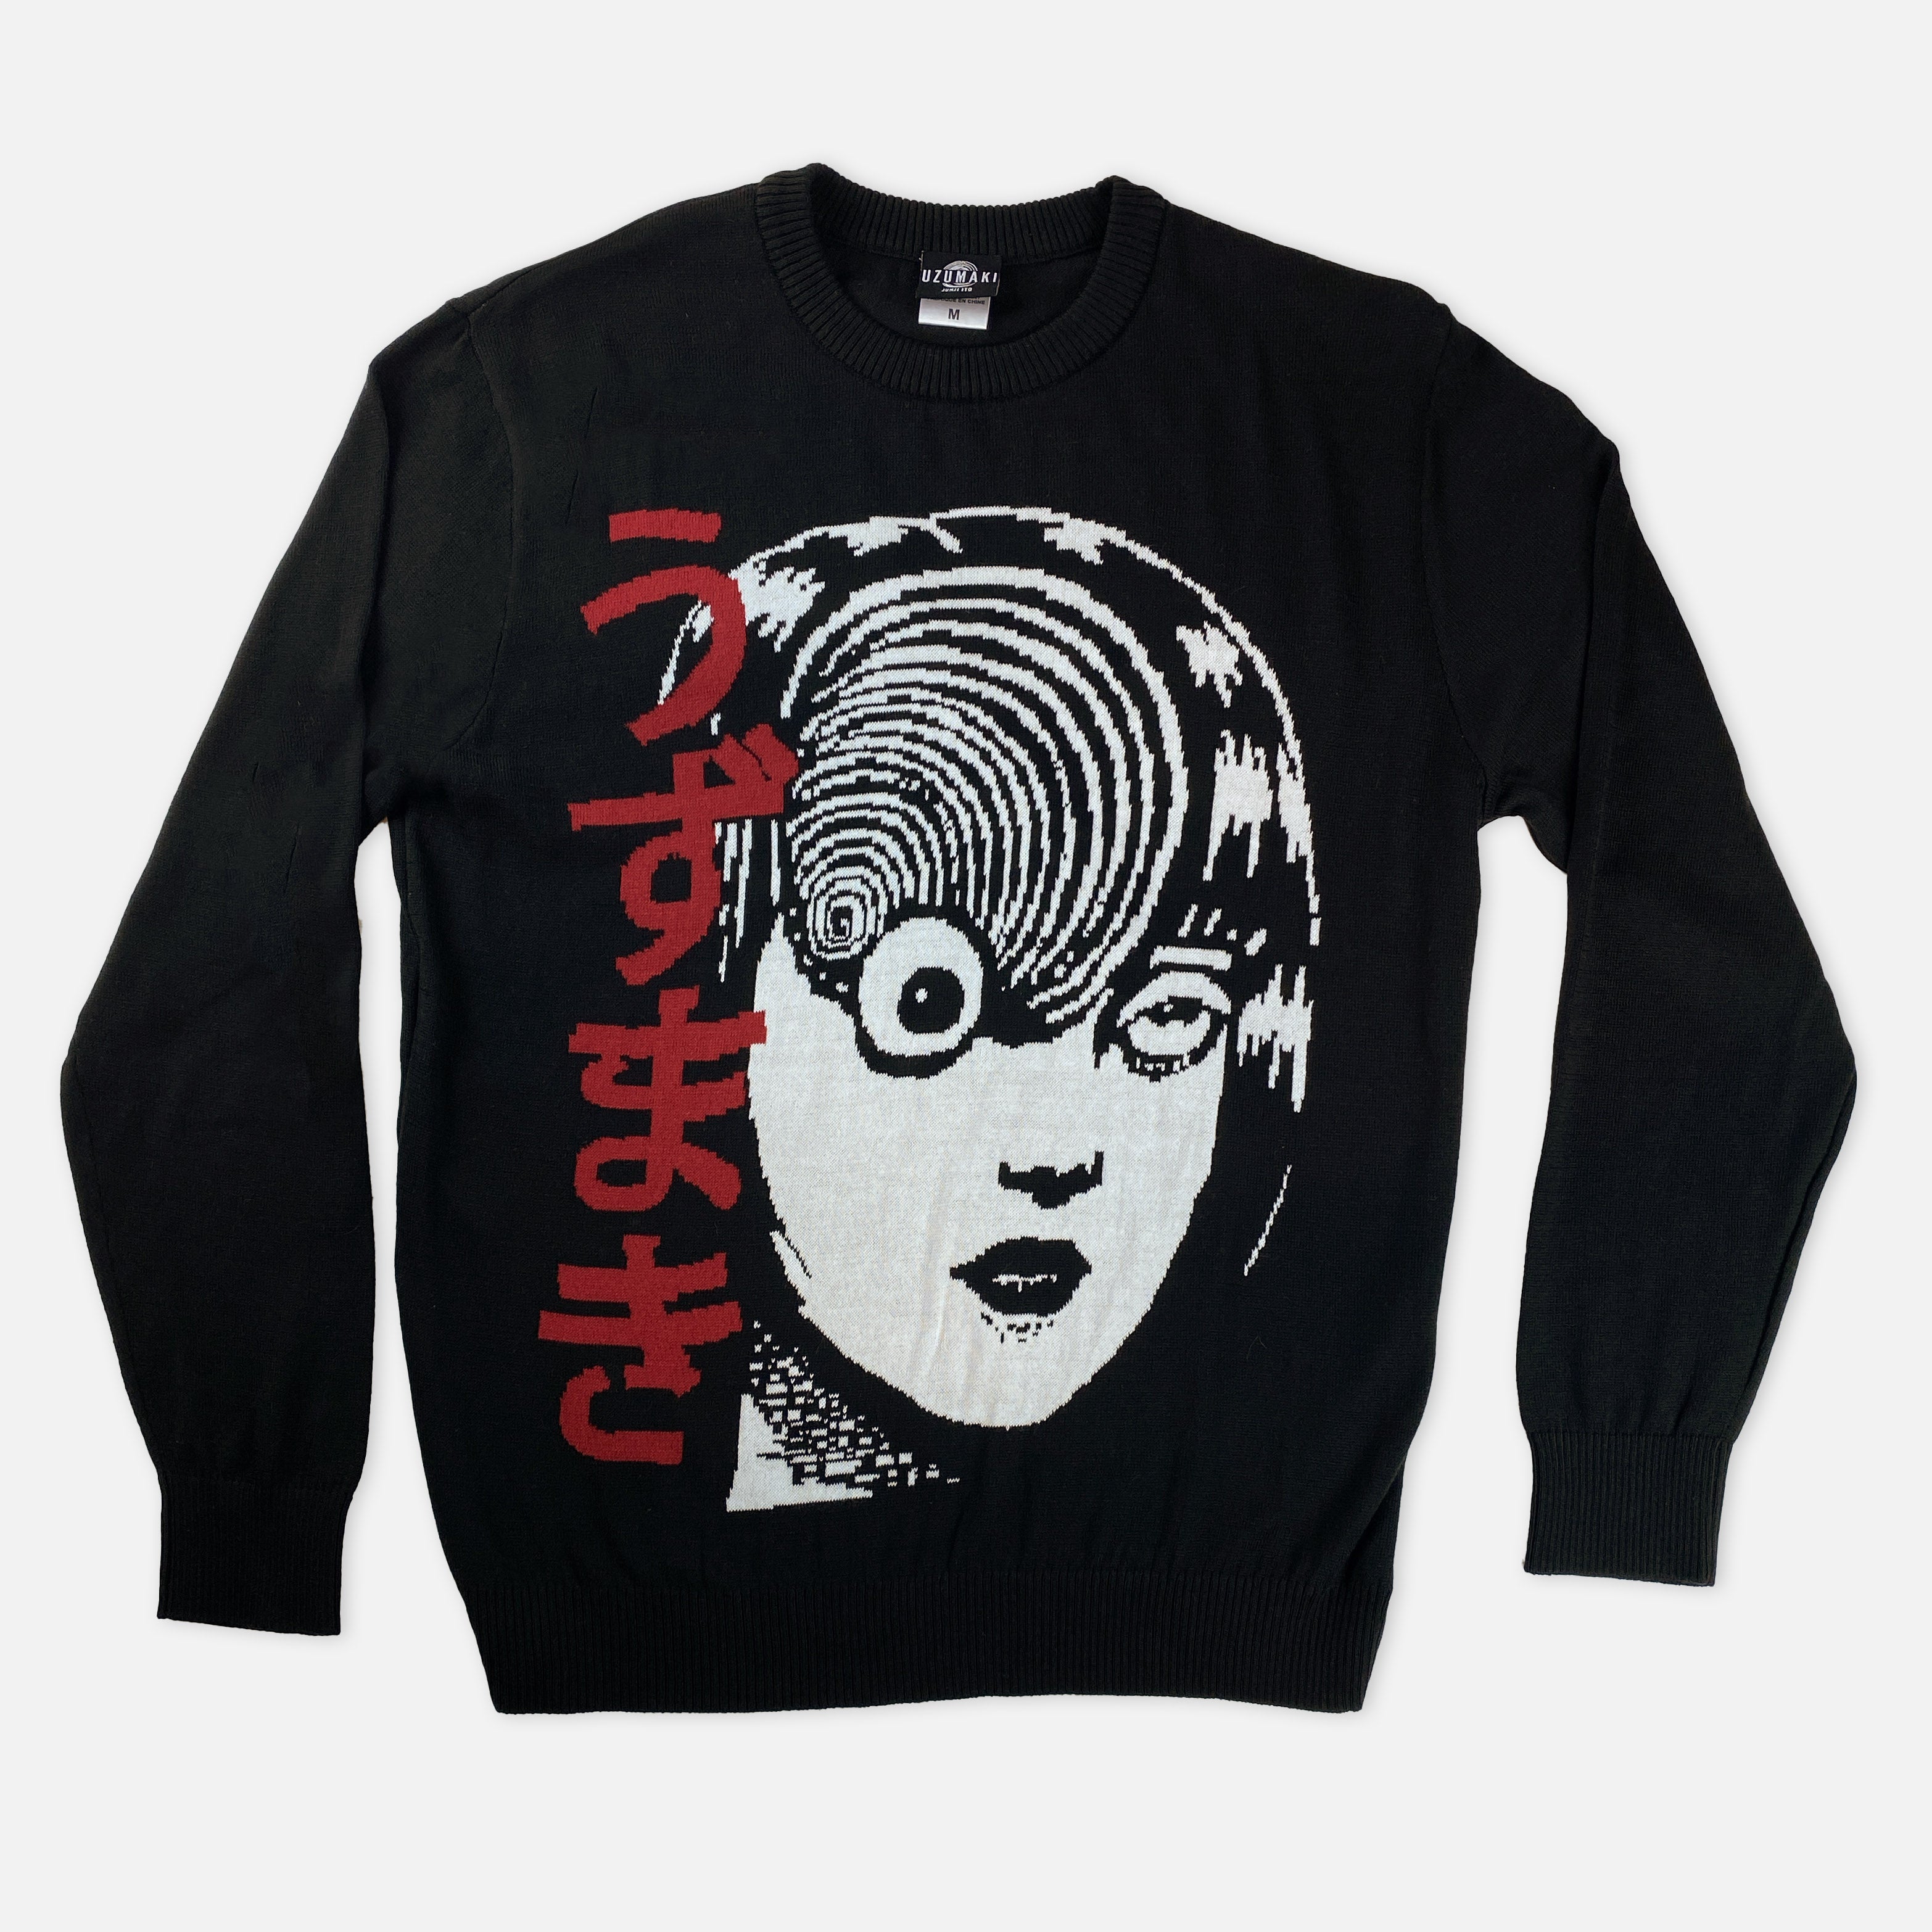 Junji Ito - The Scar Sweater - Crunchyroll Exclusive! image count 0